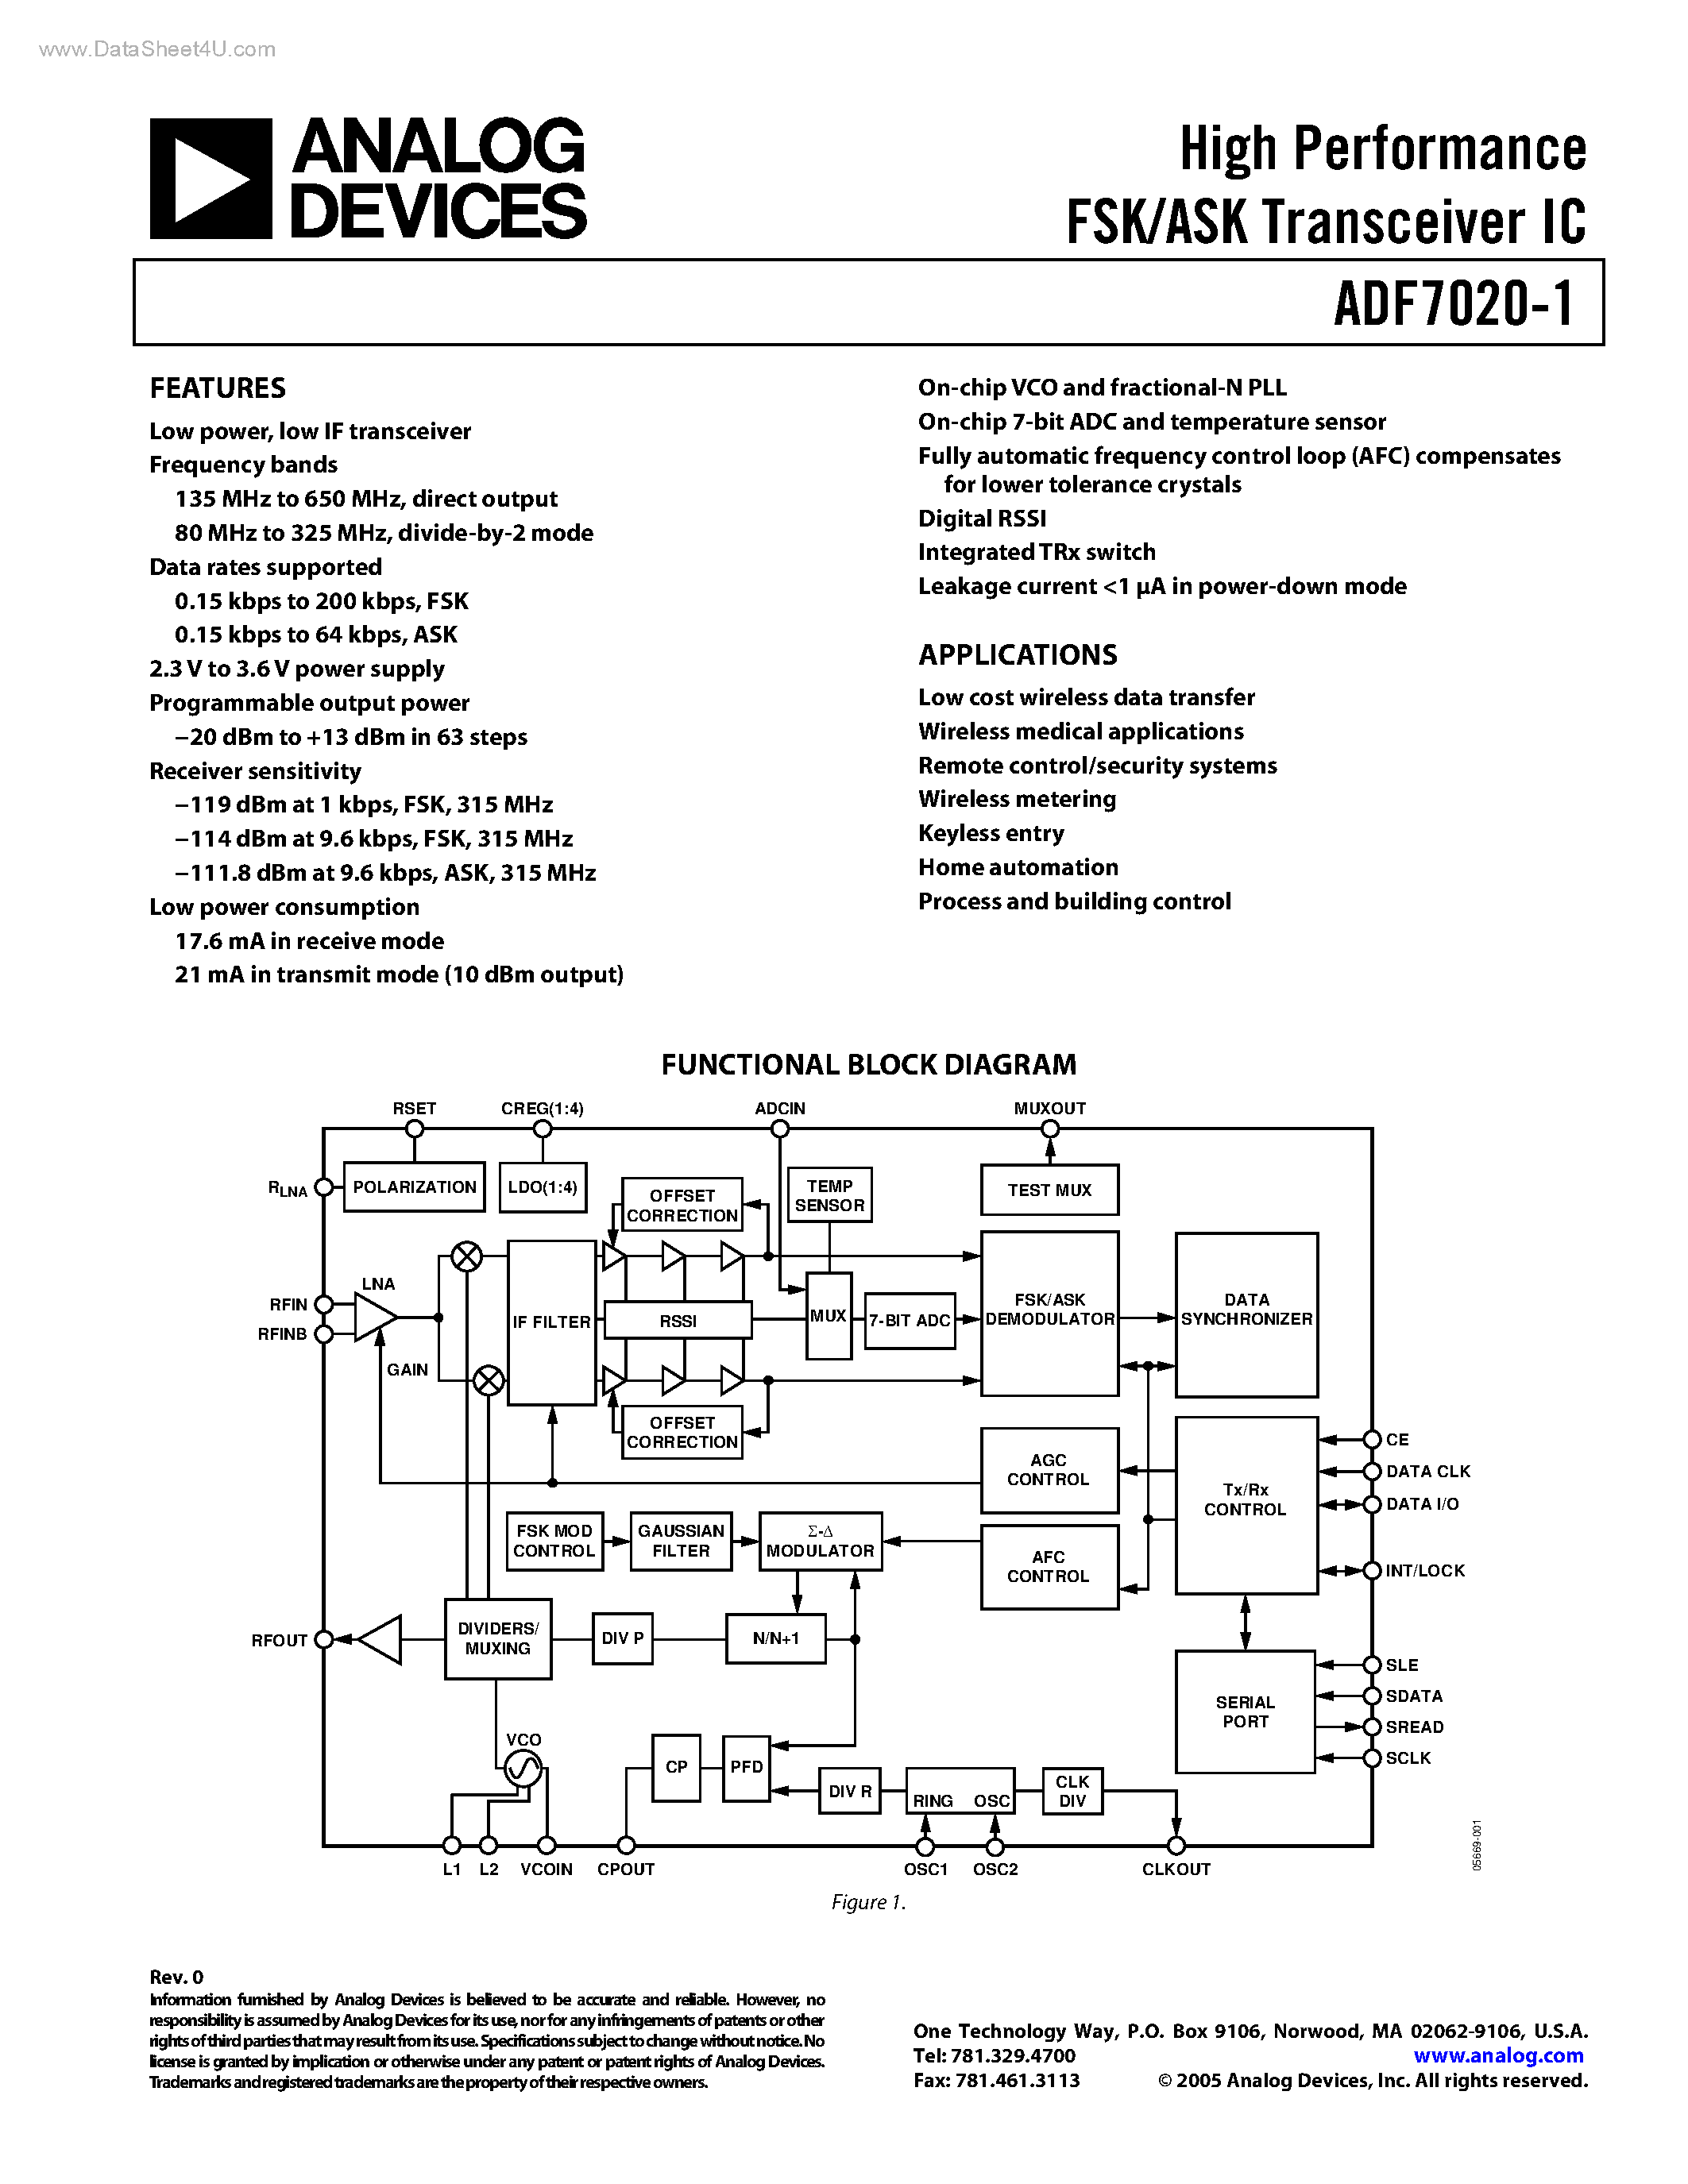 Datasheet ADF7020-1 - High Performance FSK/ASK Transceiver IC page 1